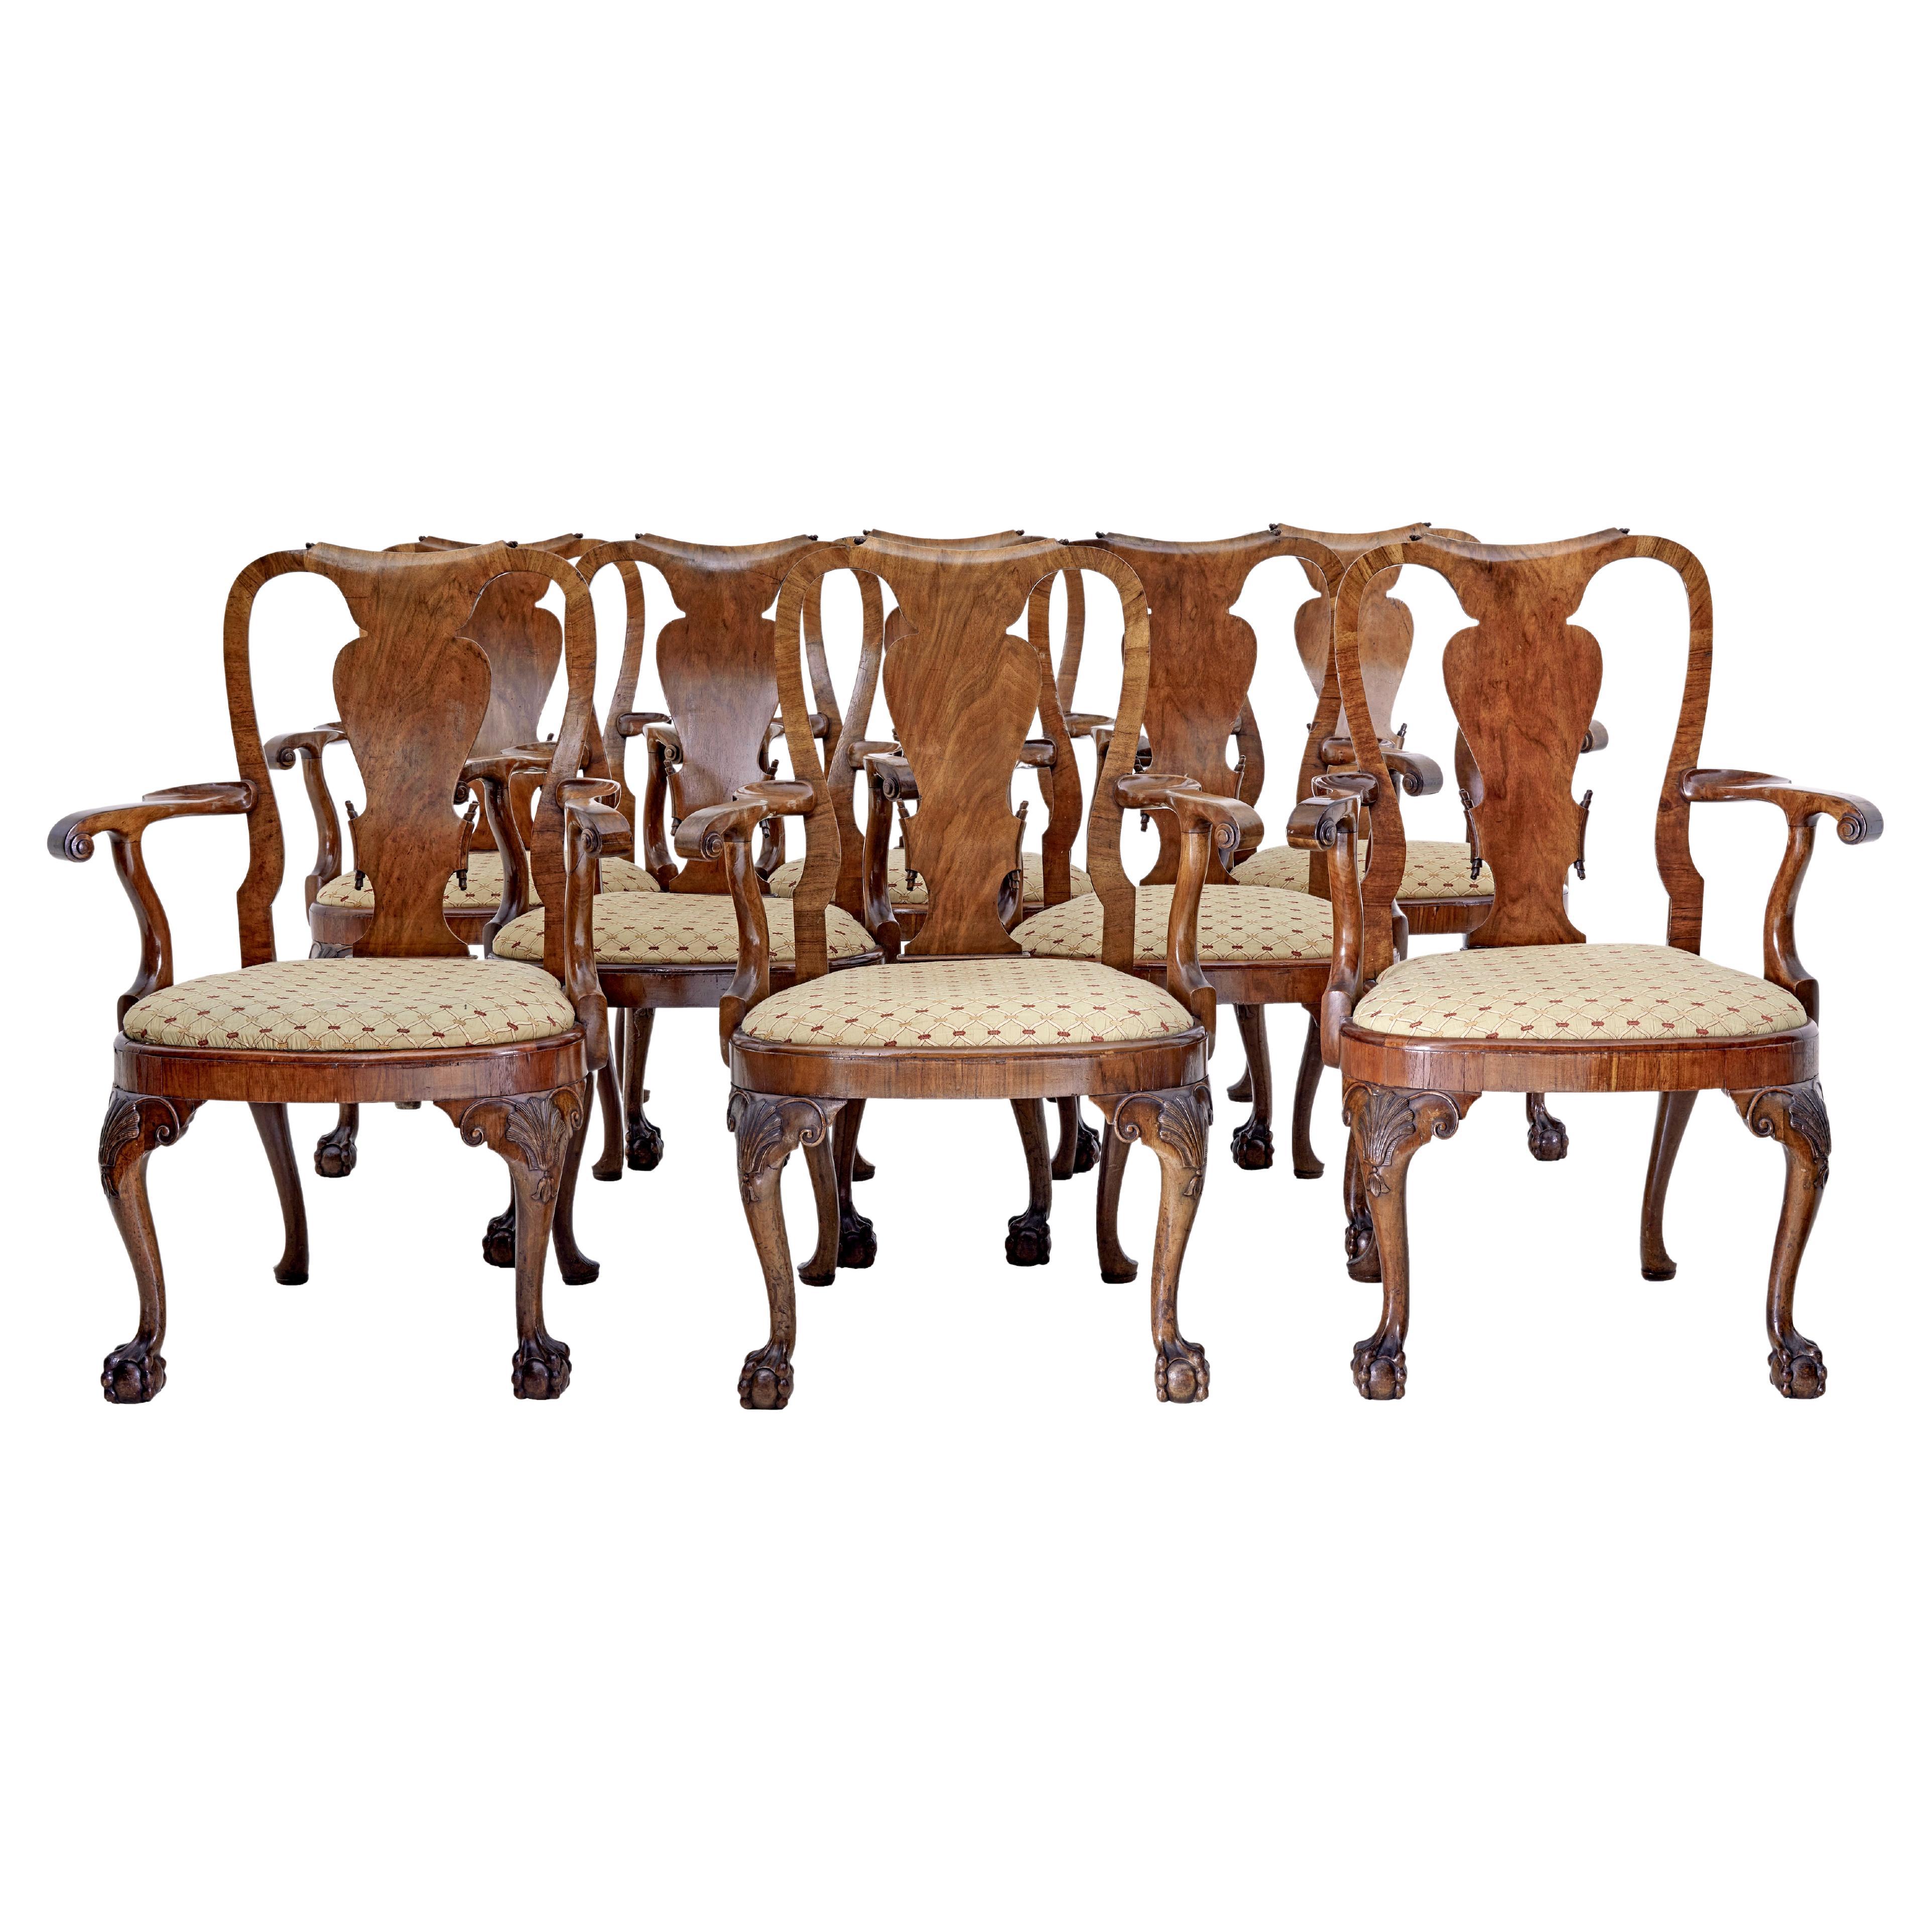 Set of 8 carved walnut dining chairs by Spillman & Co For Sale